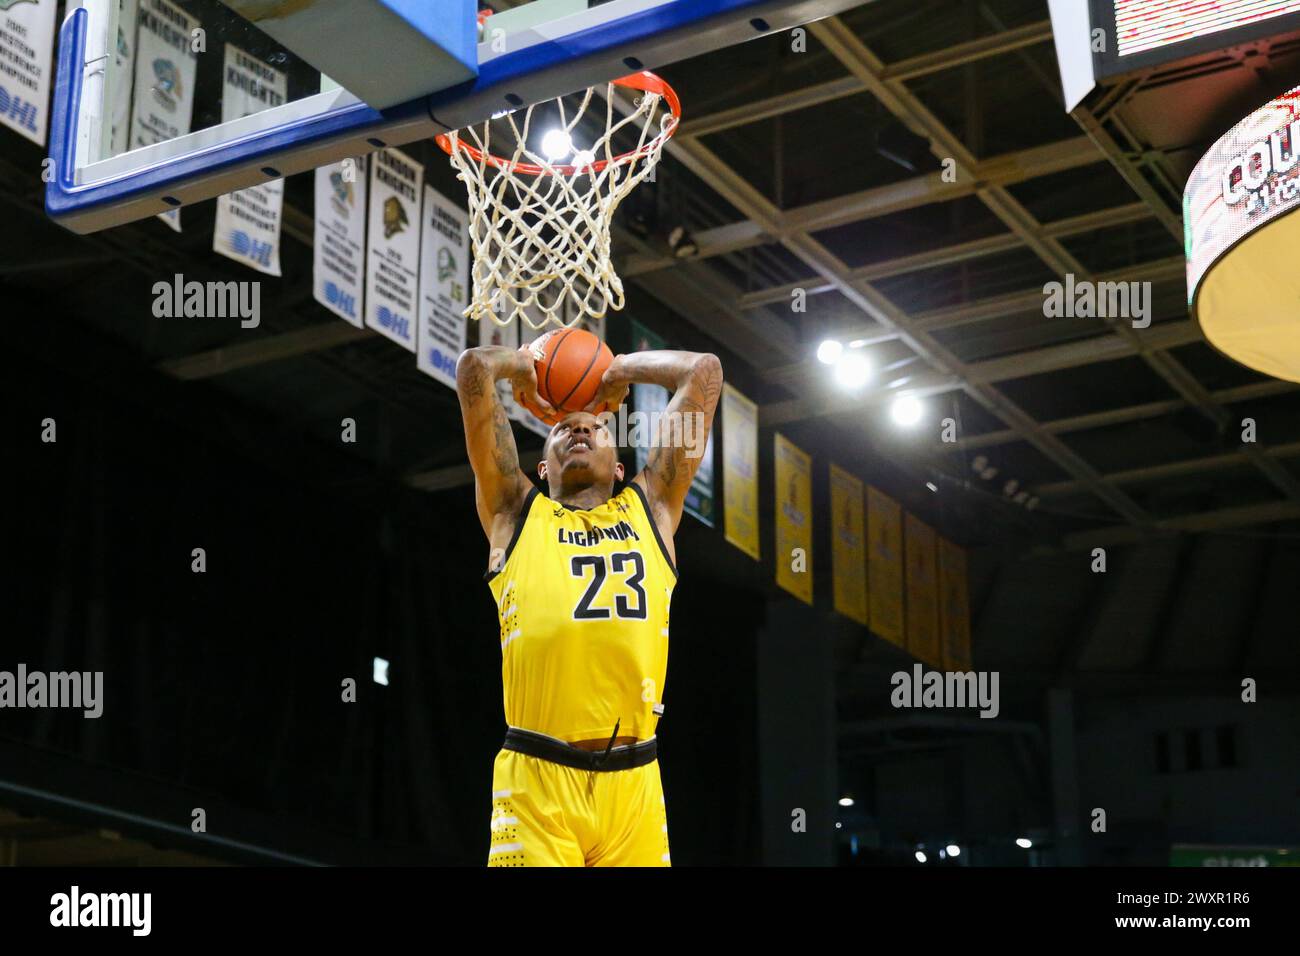 London, Canada. 1st Apr, 2024. The London Lightning lead the Newfoundland Rogues 60-56 at half time. Billy White (23) of the London Lightning goes for a dunk. Credit: Luke Durda/Alamy Live News Stock Photo